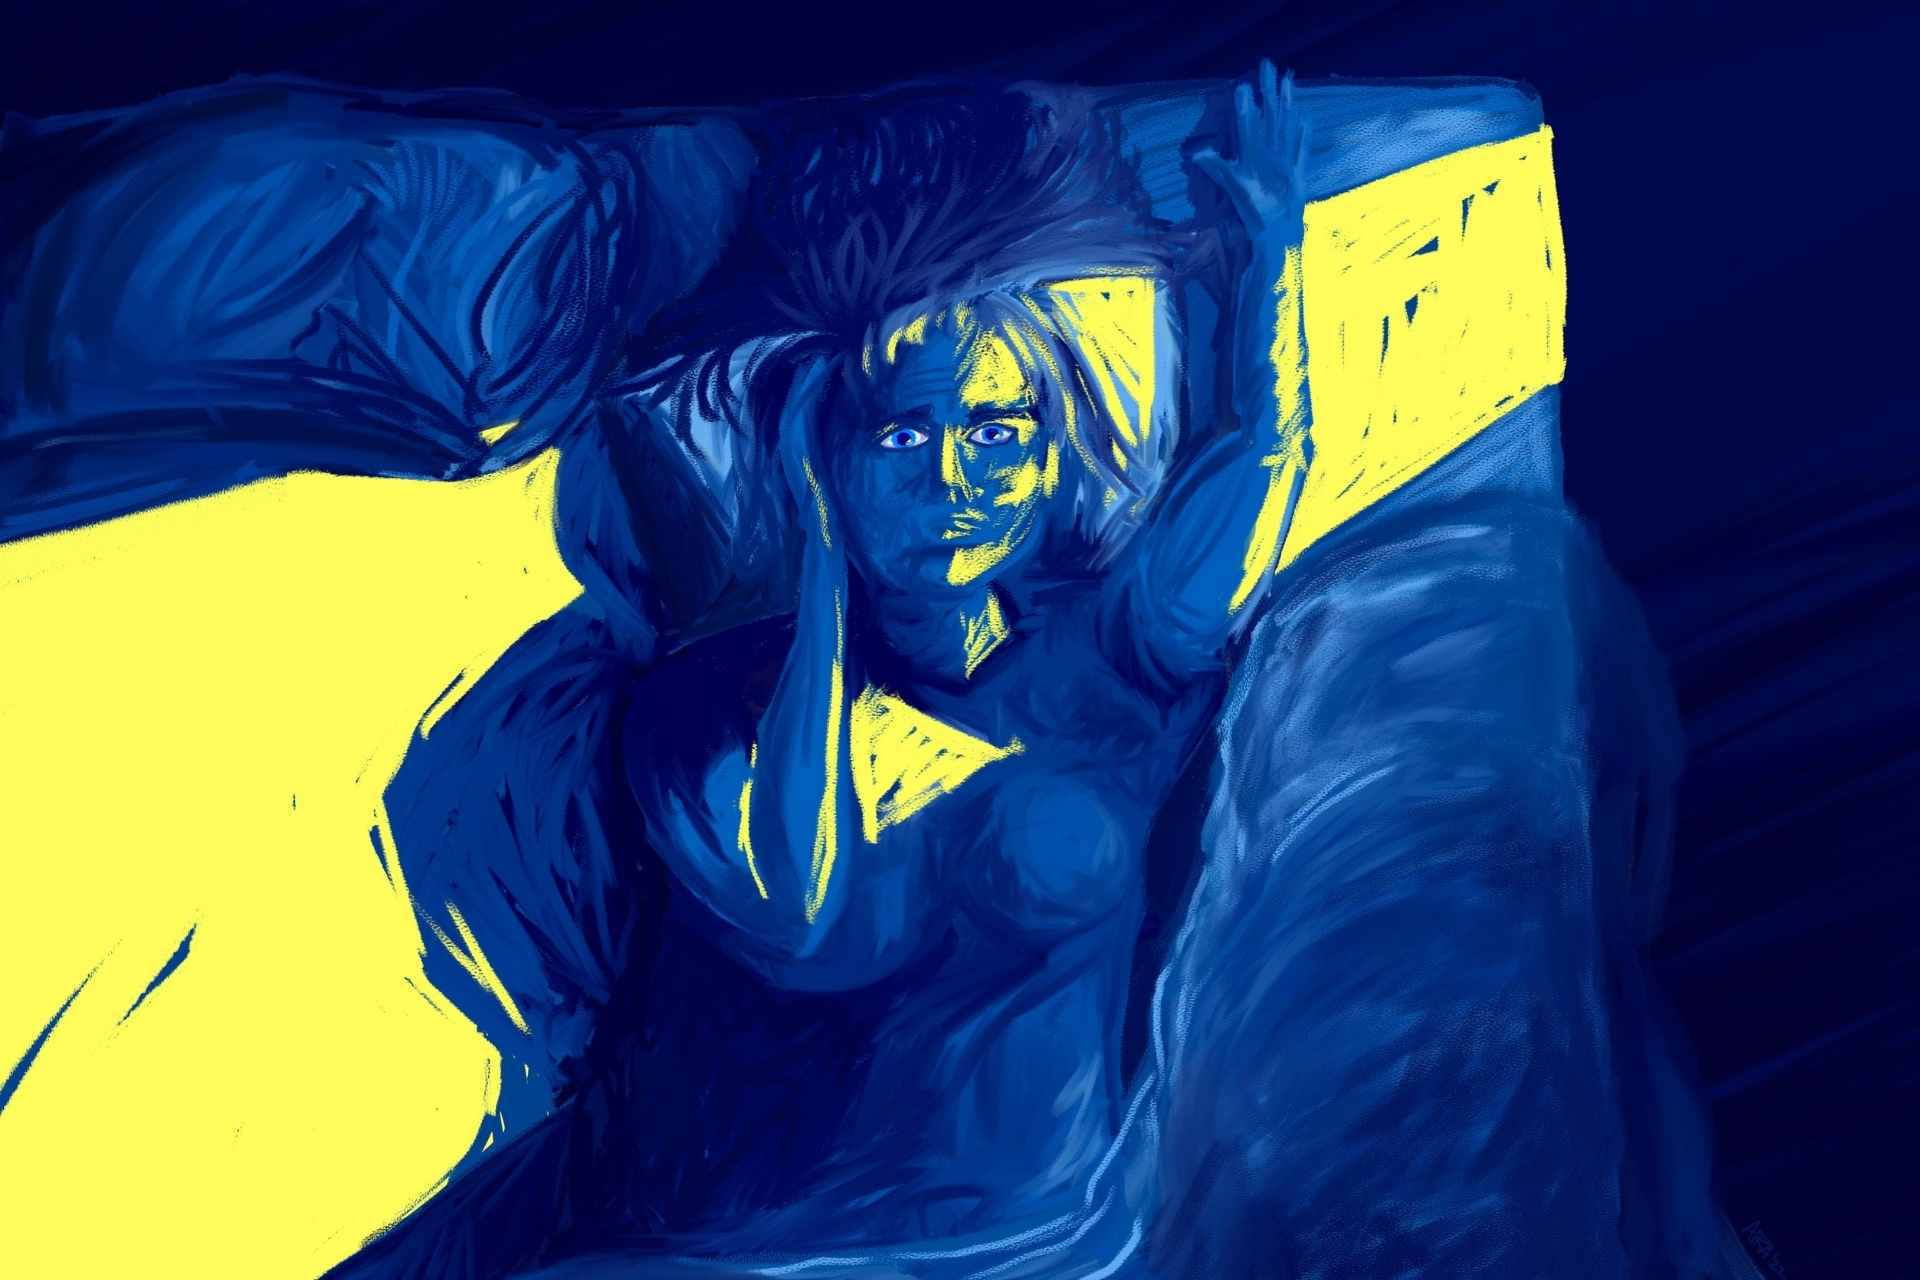 A study led by WVU School of Medicine researcher Sunil Sharma suggests that WVU’s new sleep medicine program is effective at identifying hospital patients at risk of sleep-disordered breathing and making them less likely to be readmitted to the hospital within six months of being discharged. (WVU Illustration/Aira Burkhart)